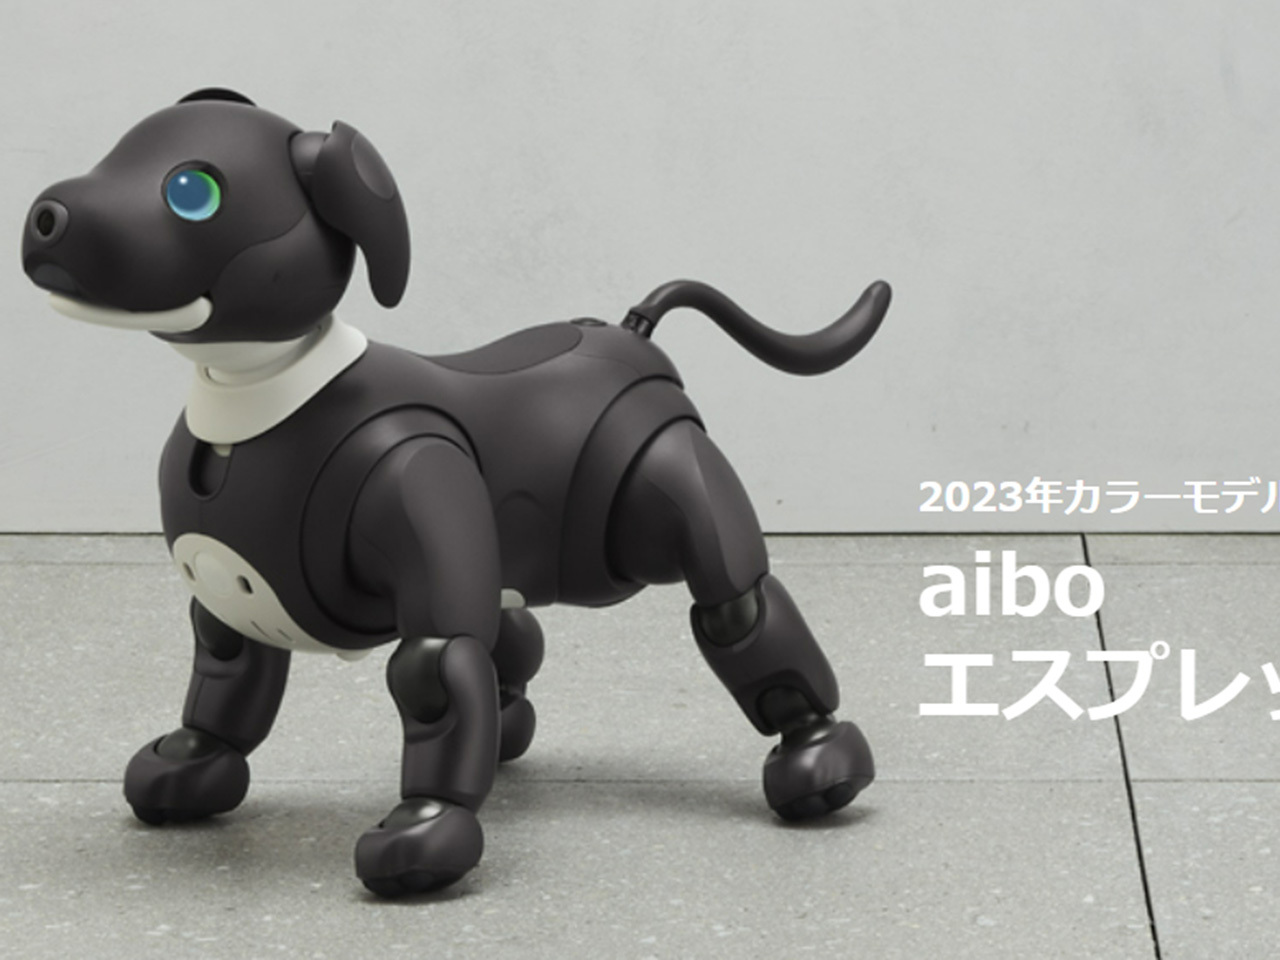 SONY aibo ERS−1000 犬型ロボット - その他